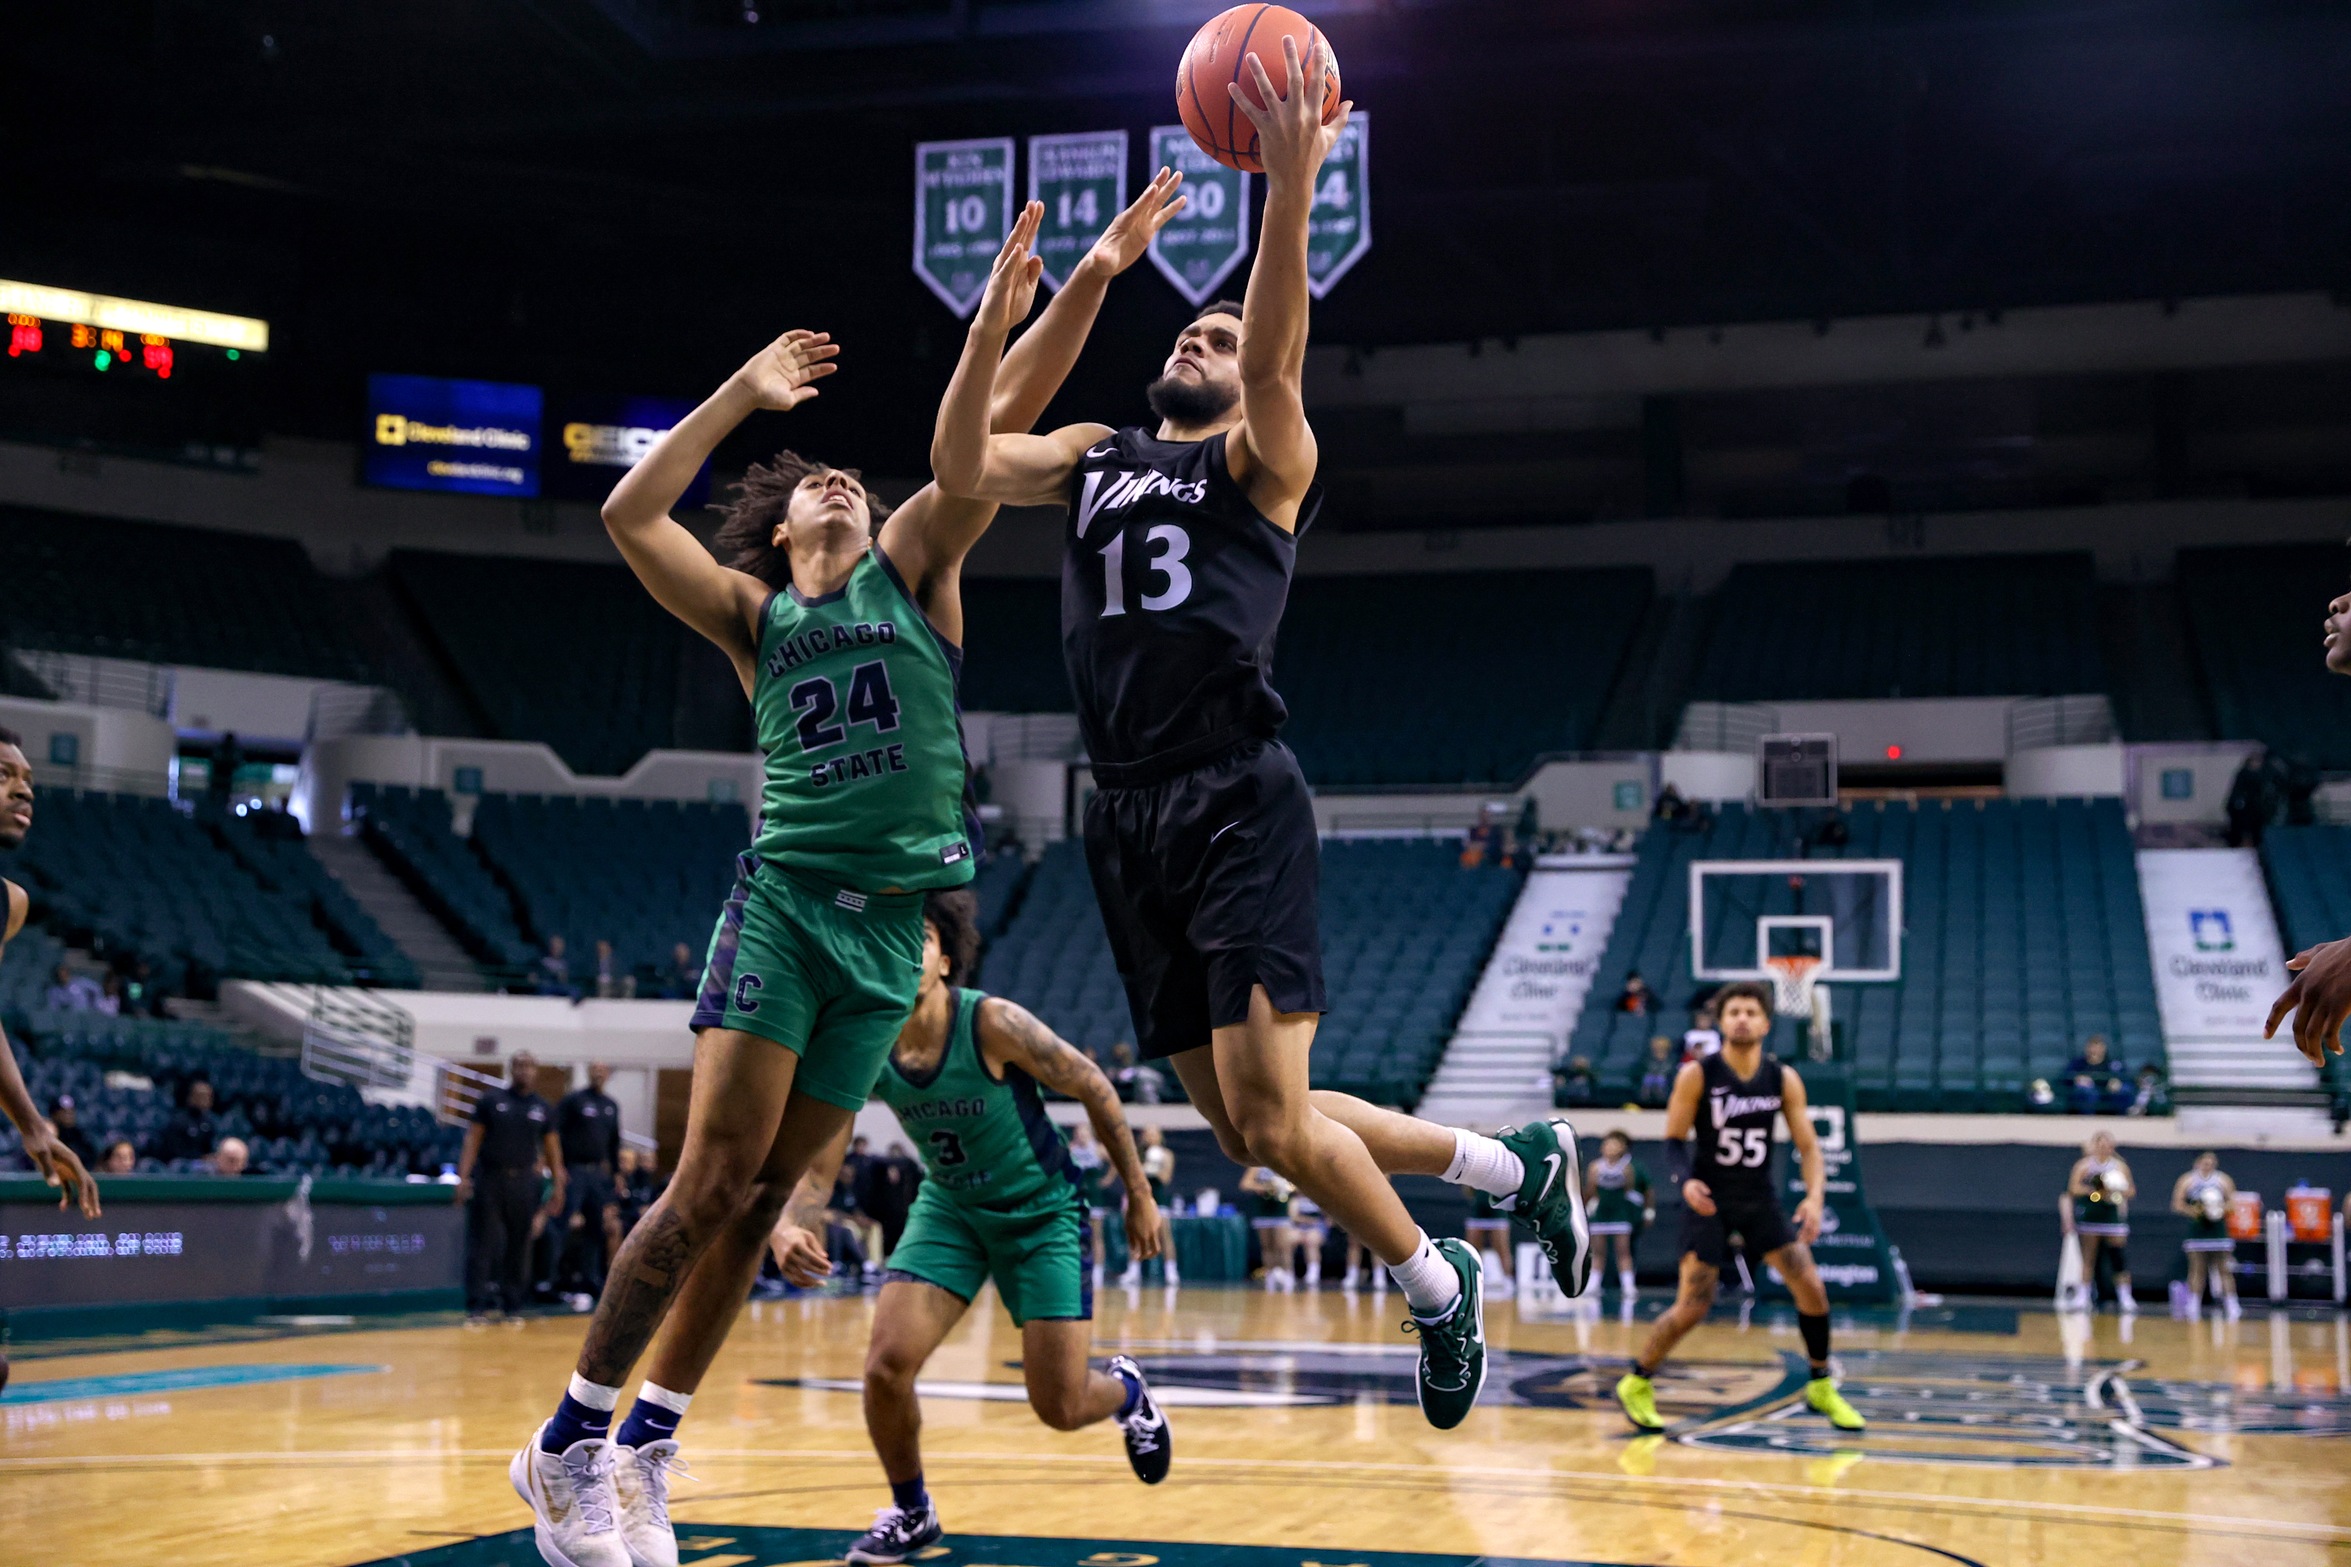 Cleveland State Men’s Basketball Wins Third Straight, Defeating Chicago State